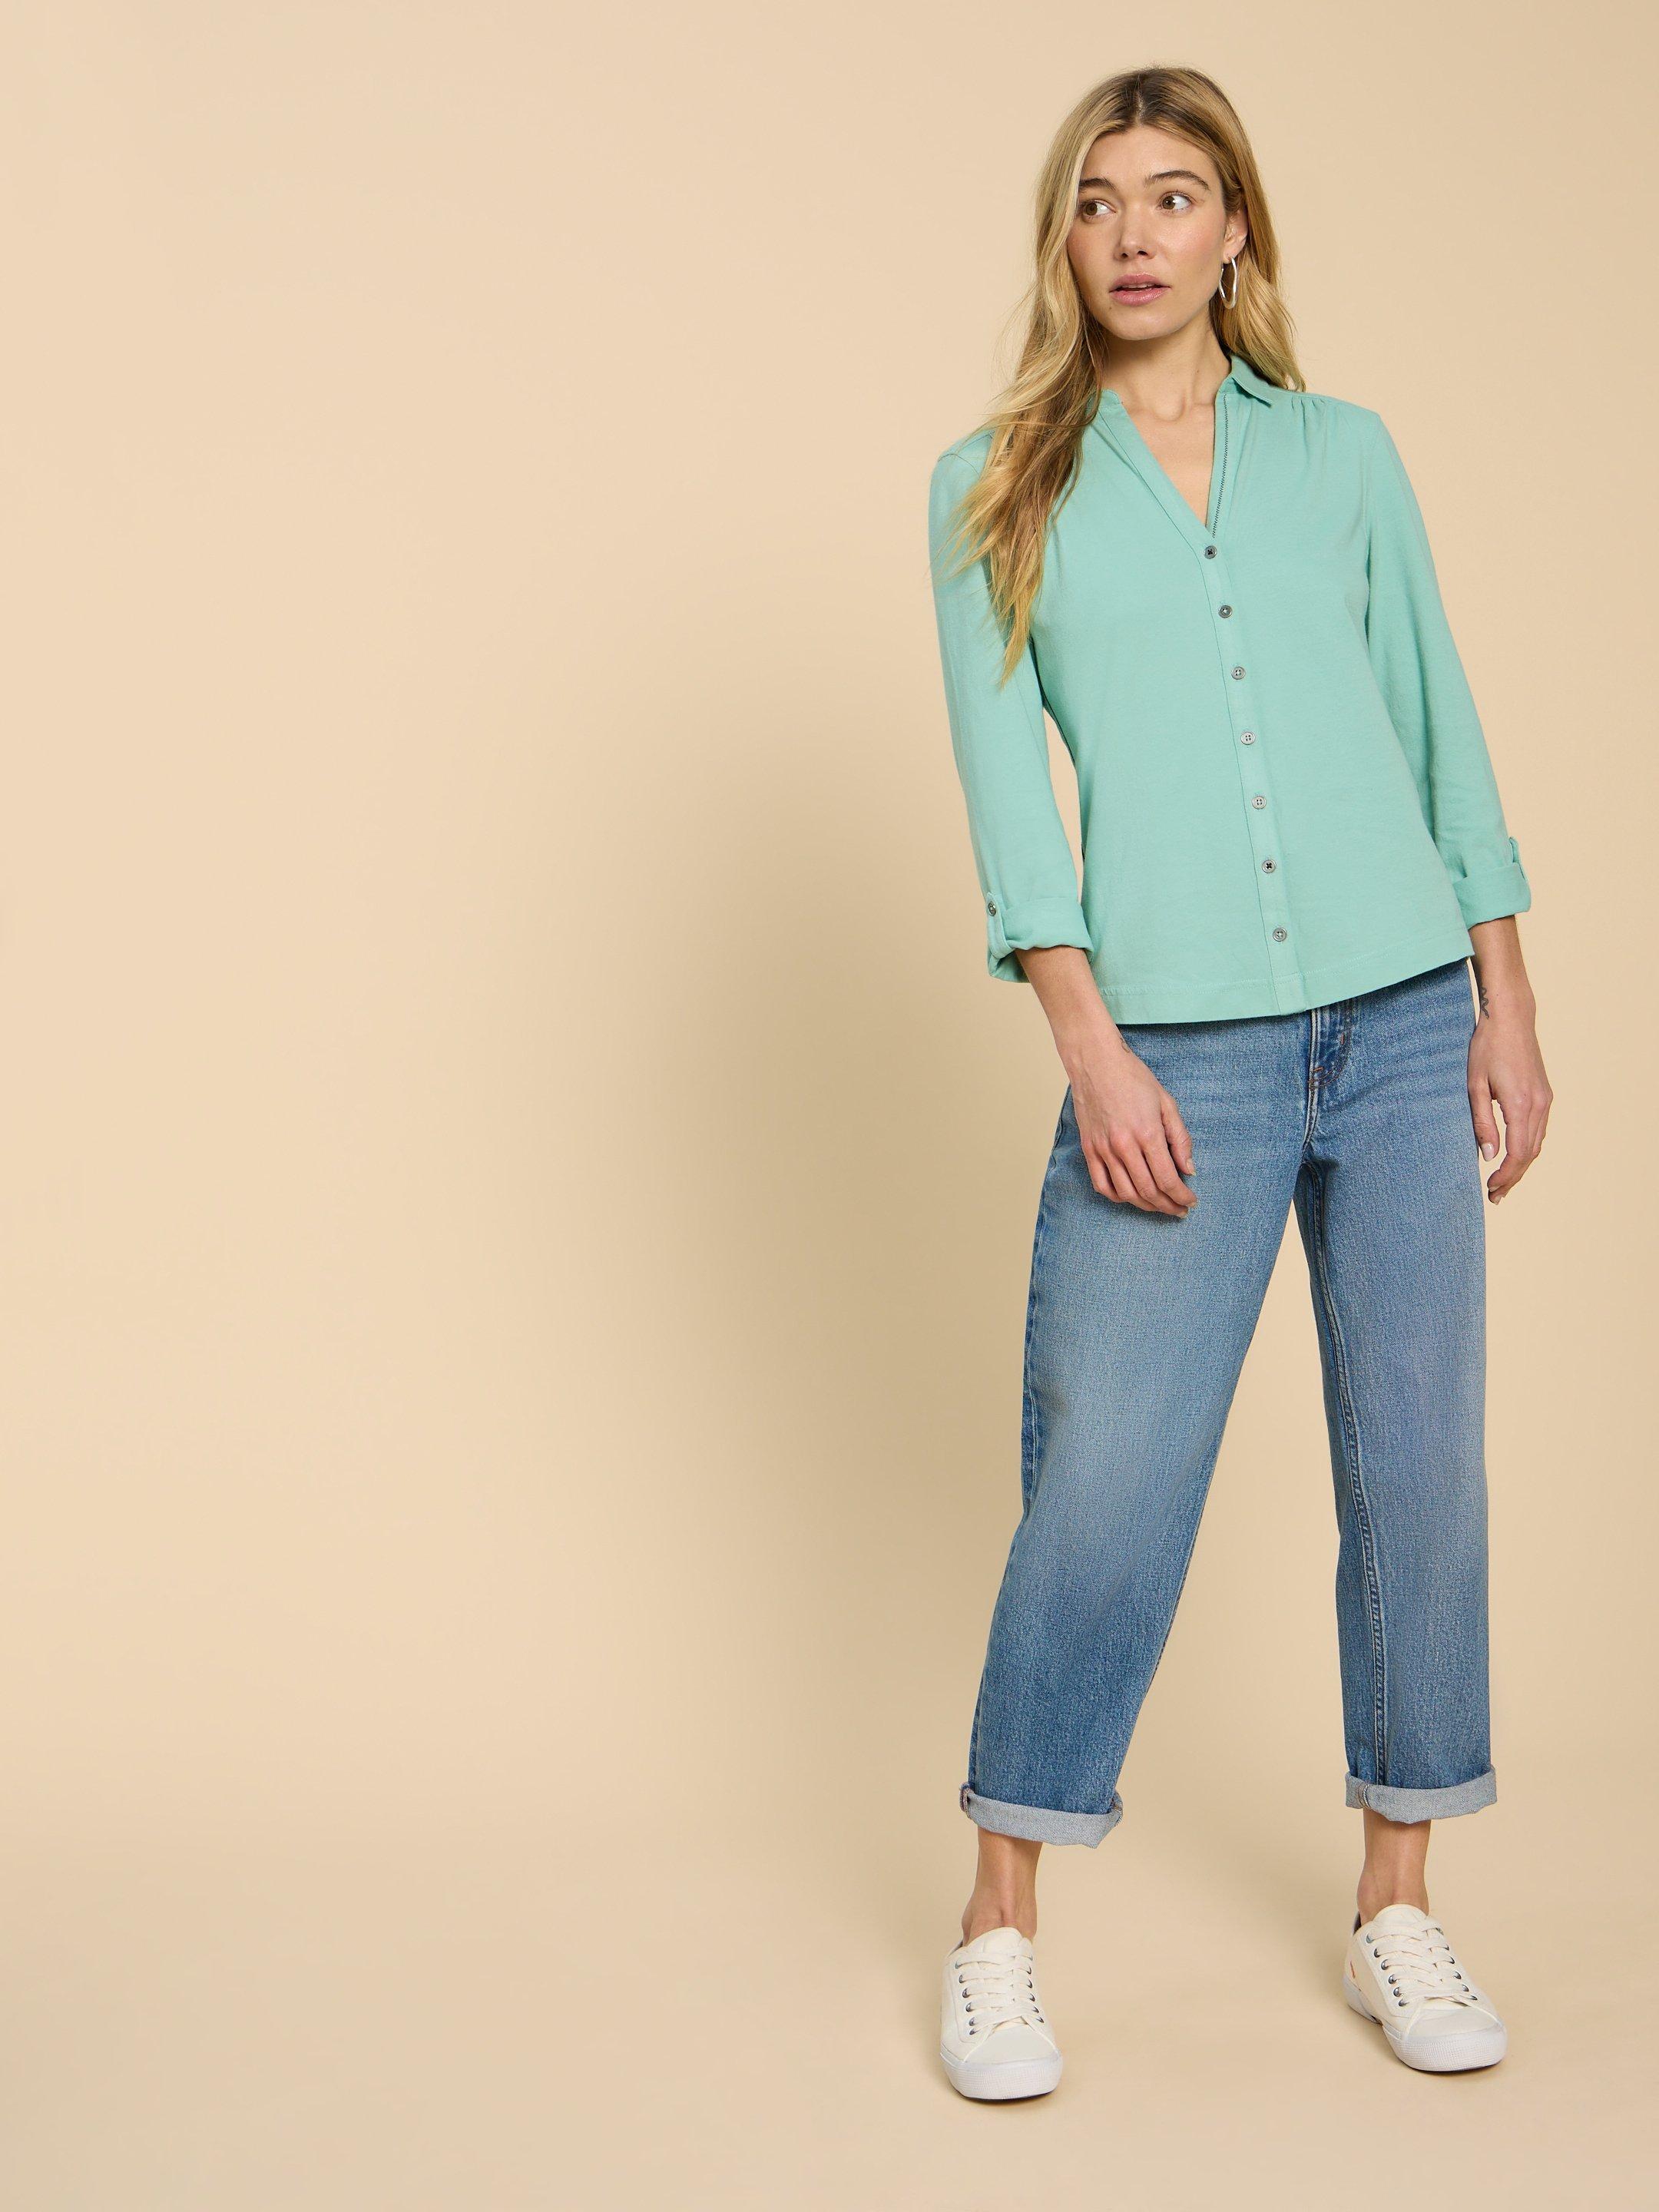 ANNIE JERSEY PRINT SHIRT in MID TEAL - MODEL FRONT